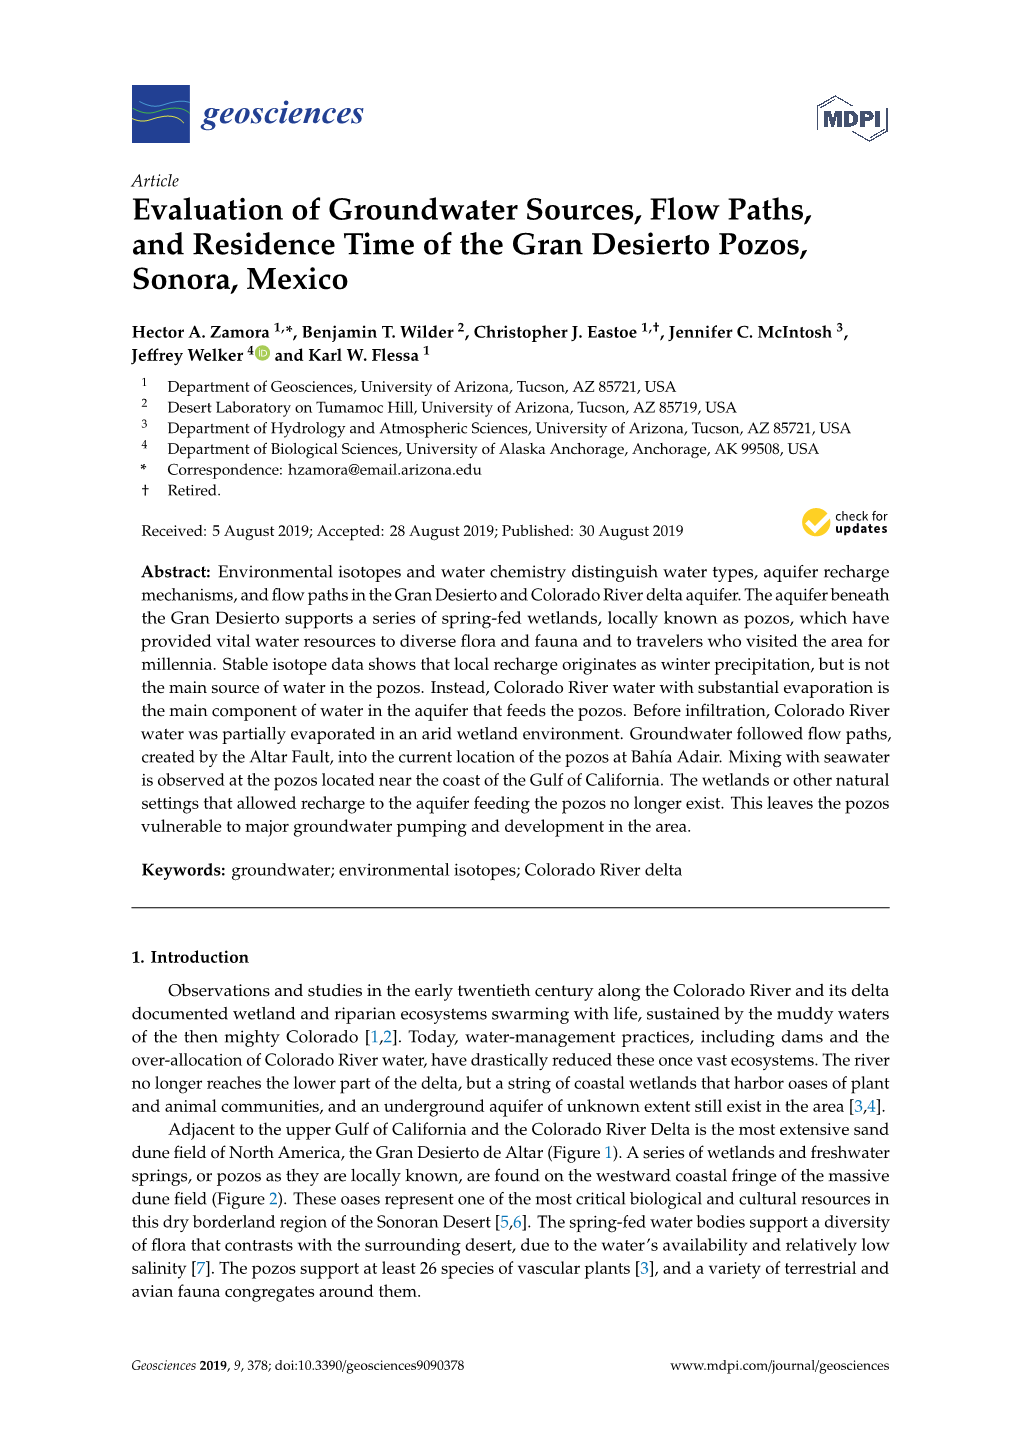 Evaluation of Groundwater Sources, Flow Paths, and Residence Time of the Gran Desierto Pozos, Sonora, Mexico